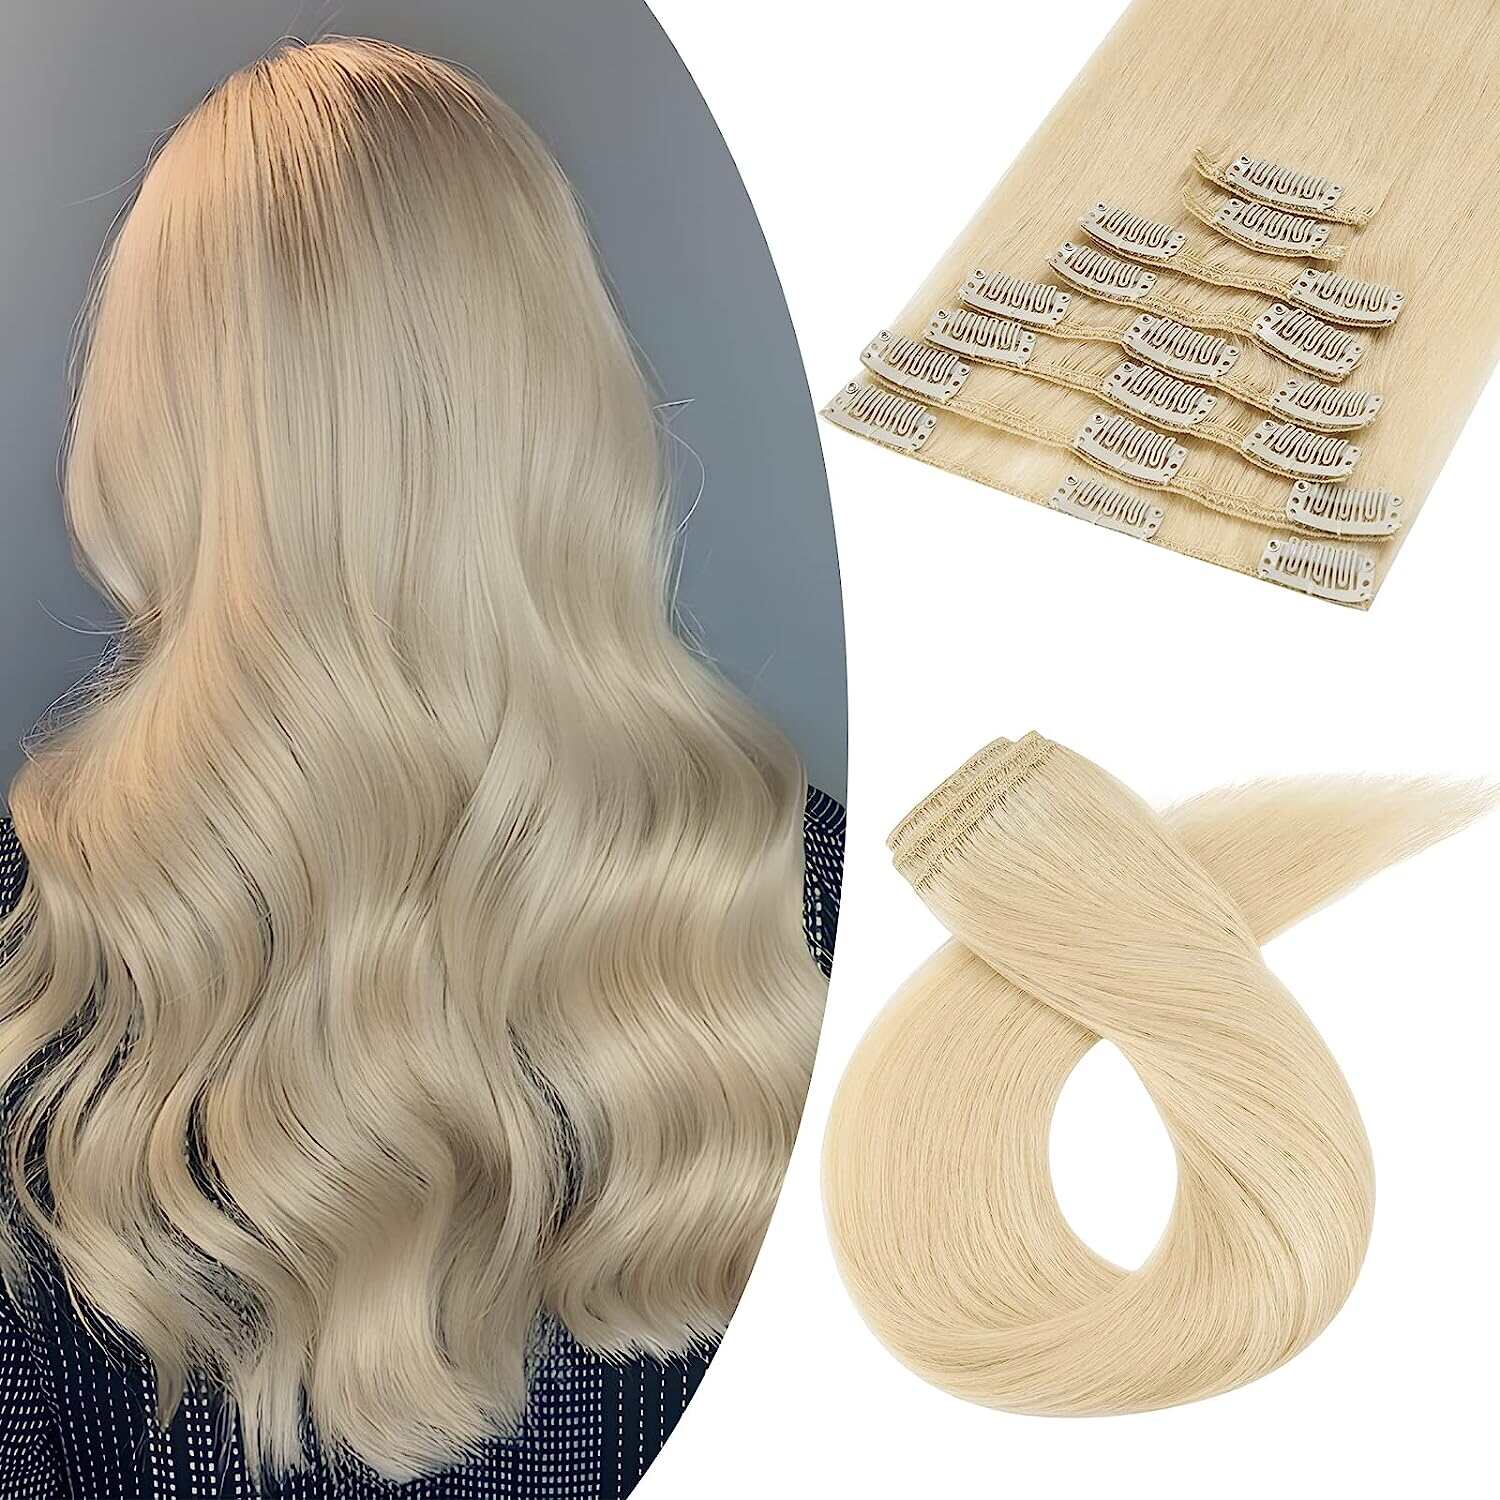 Benehair Clip-In Hair Extensions